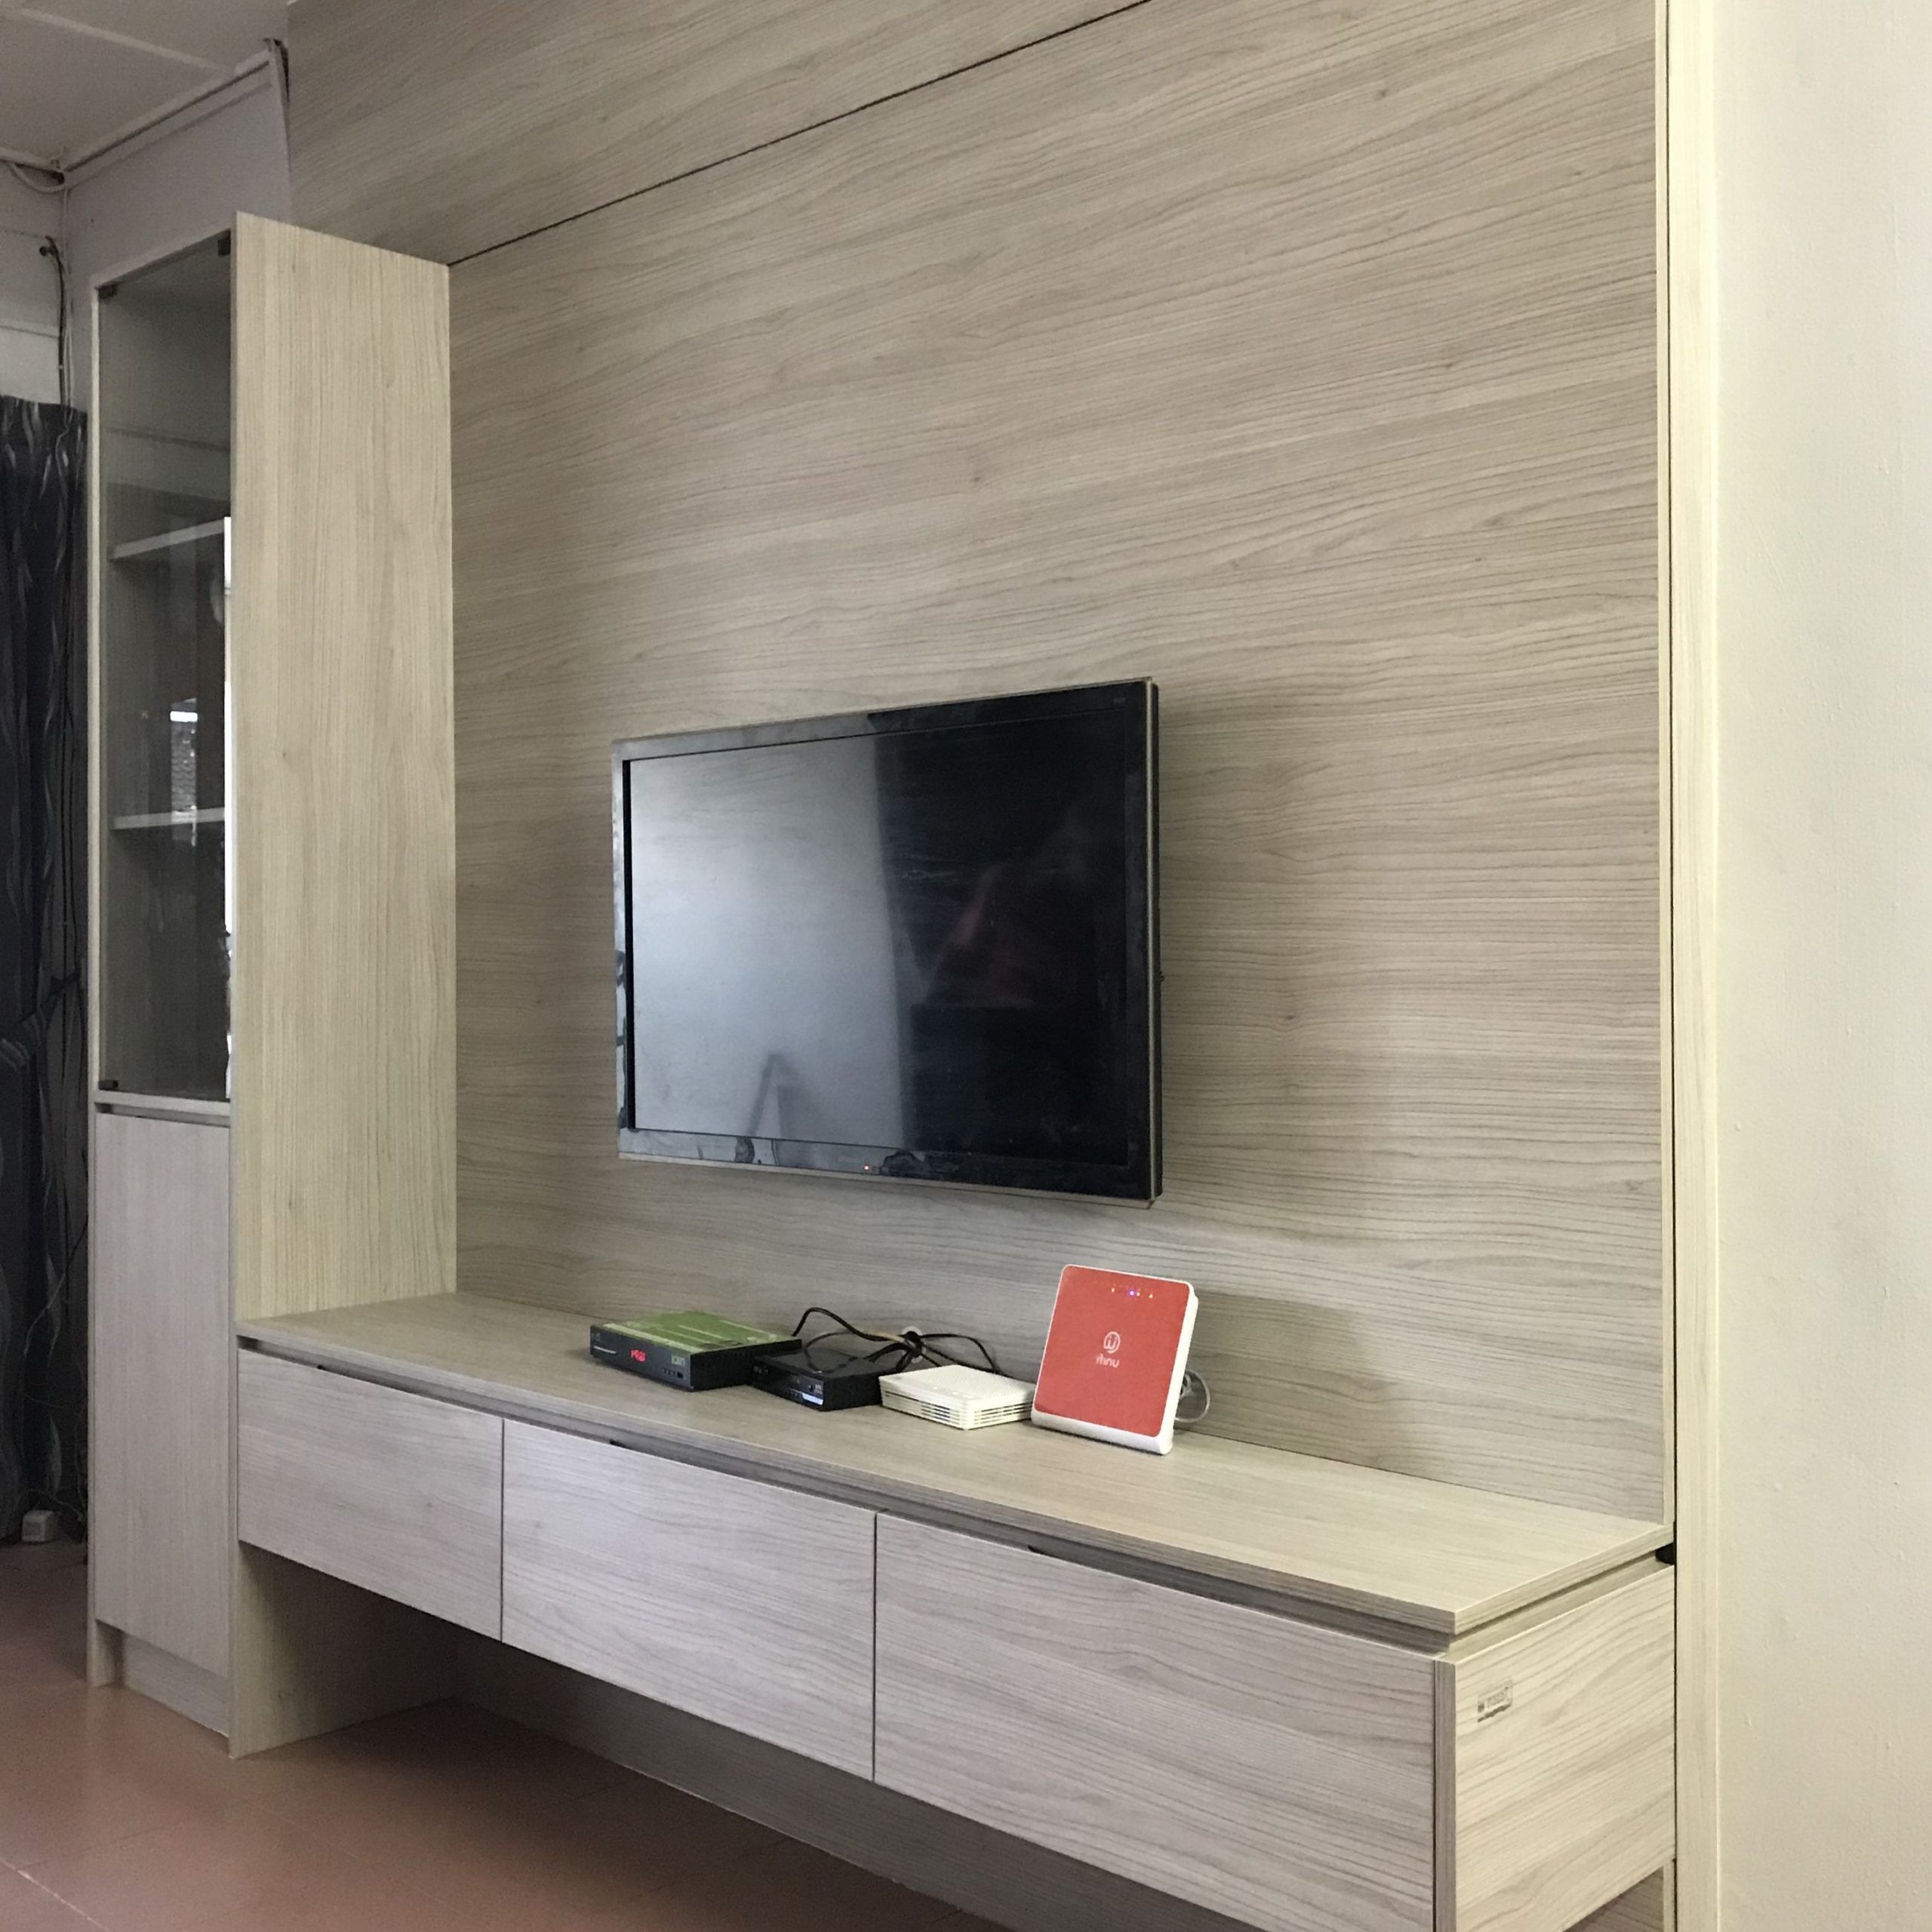 Modern Tv Room, Tv  Feature Wall, Furniture Design (View 2 of 10)